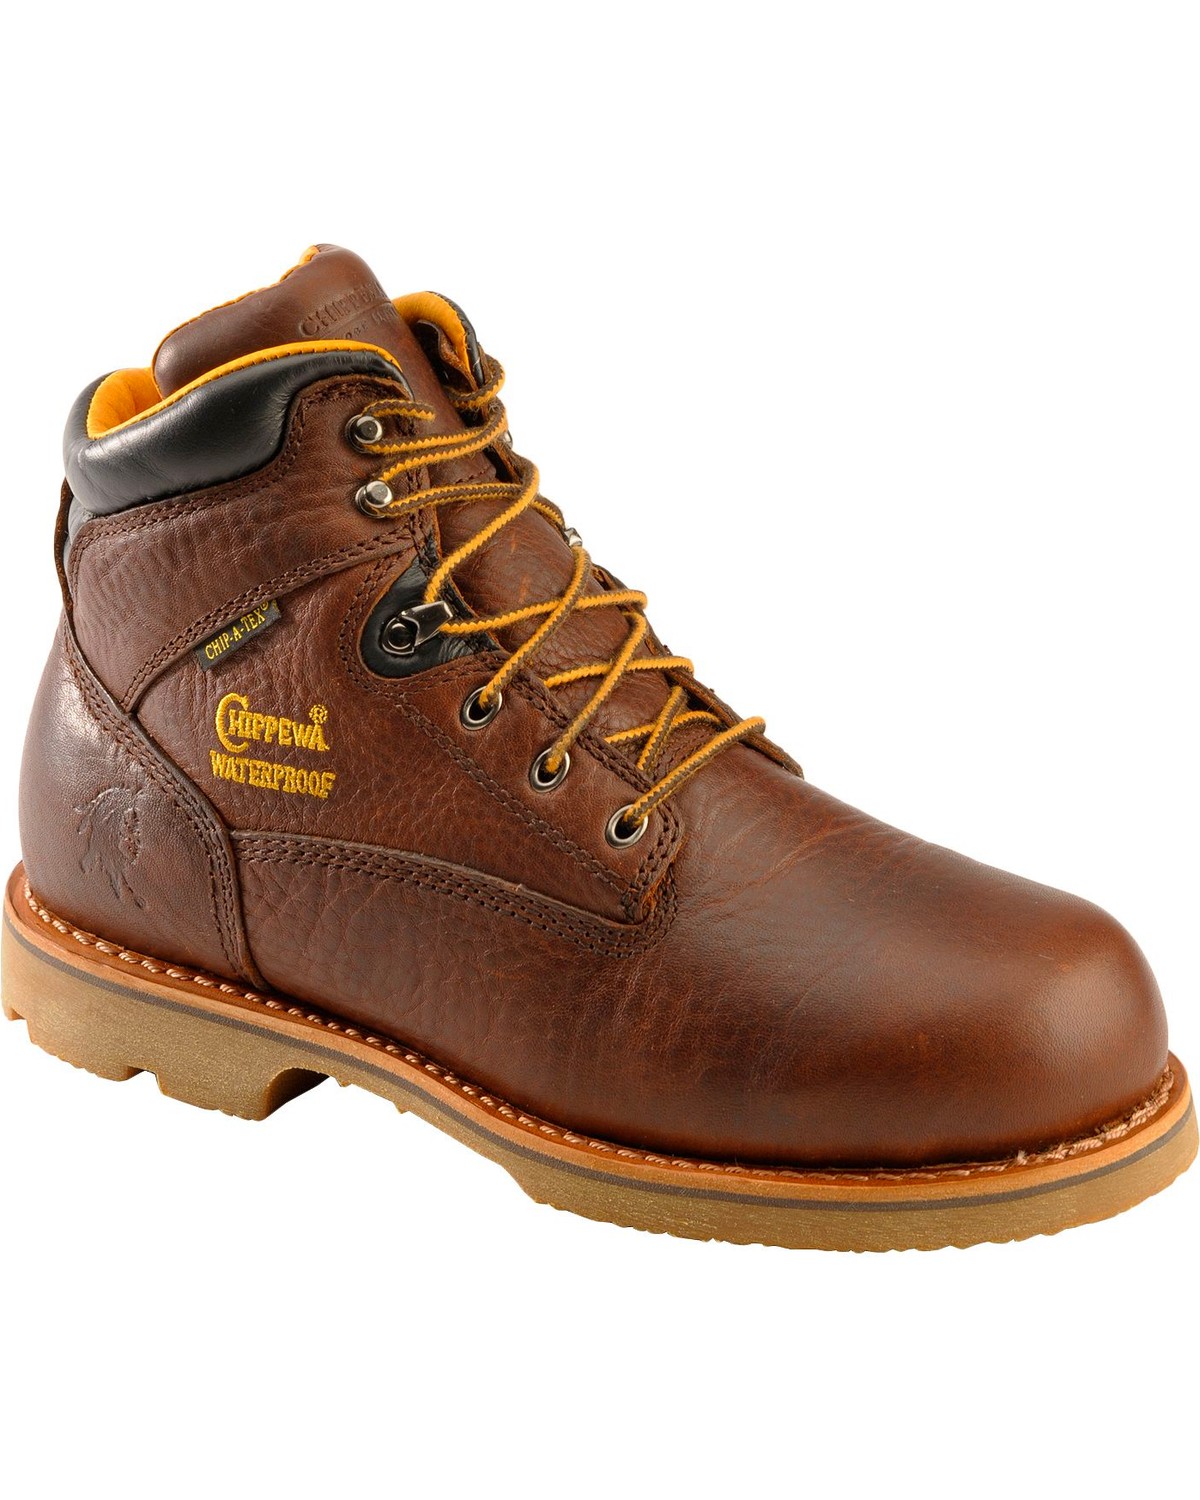 Chippewa Men's Waterproof & Insulated 6" Lace-Up Work Boots - Round Toe